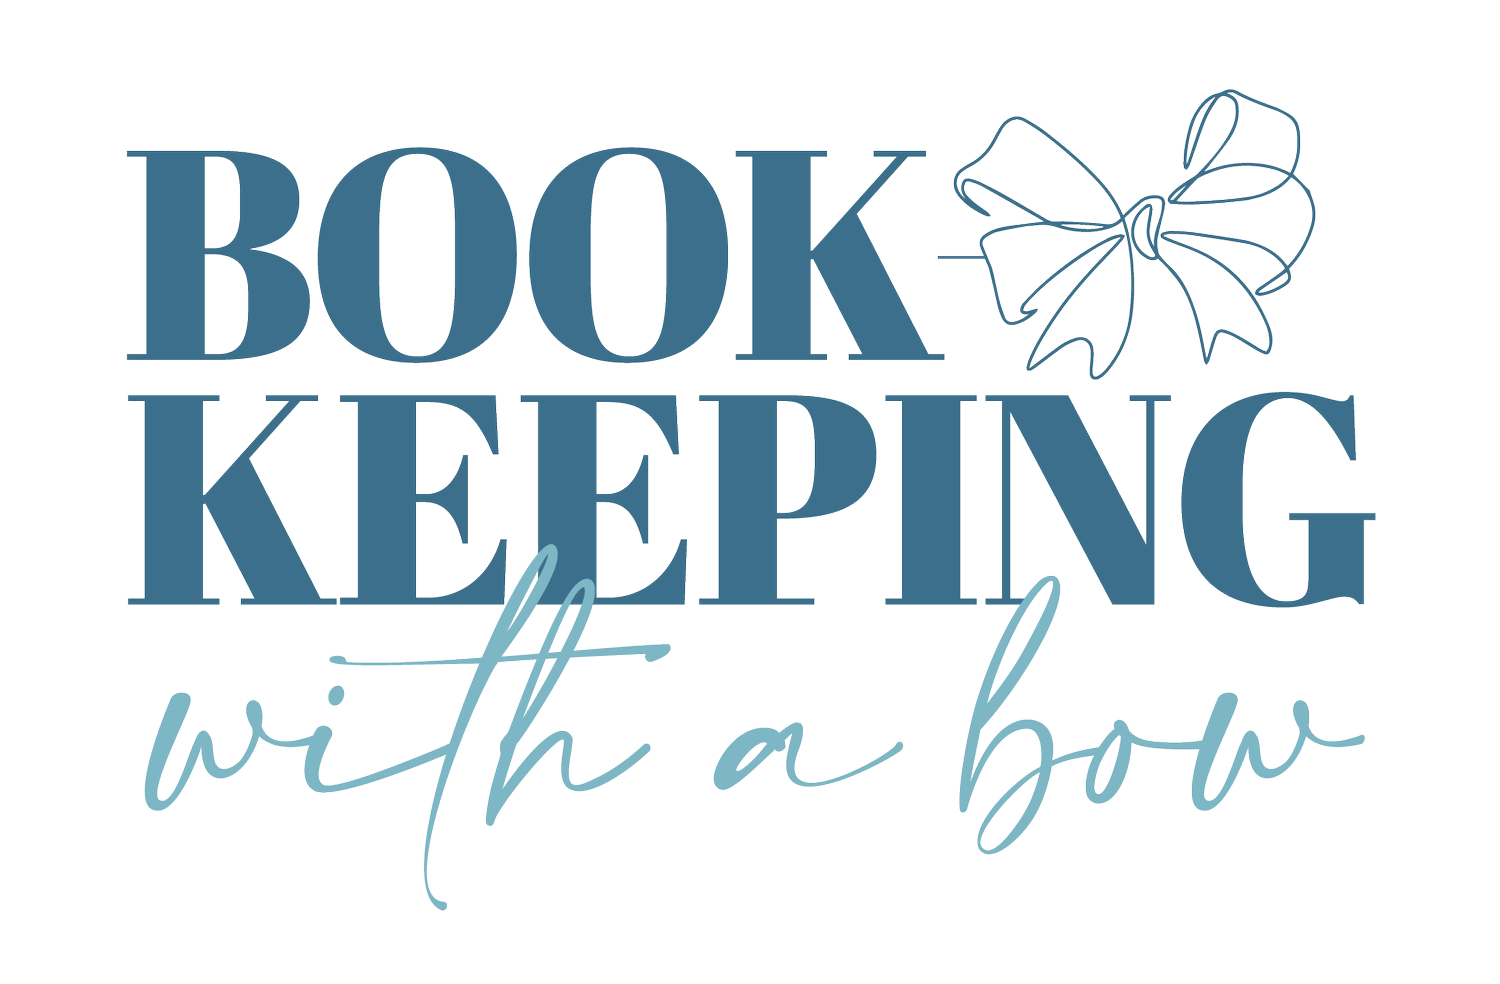 Bookkeeping with a Bow